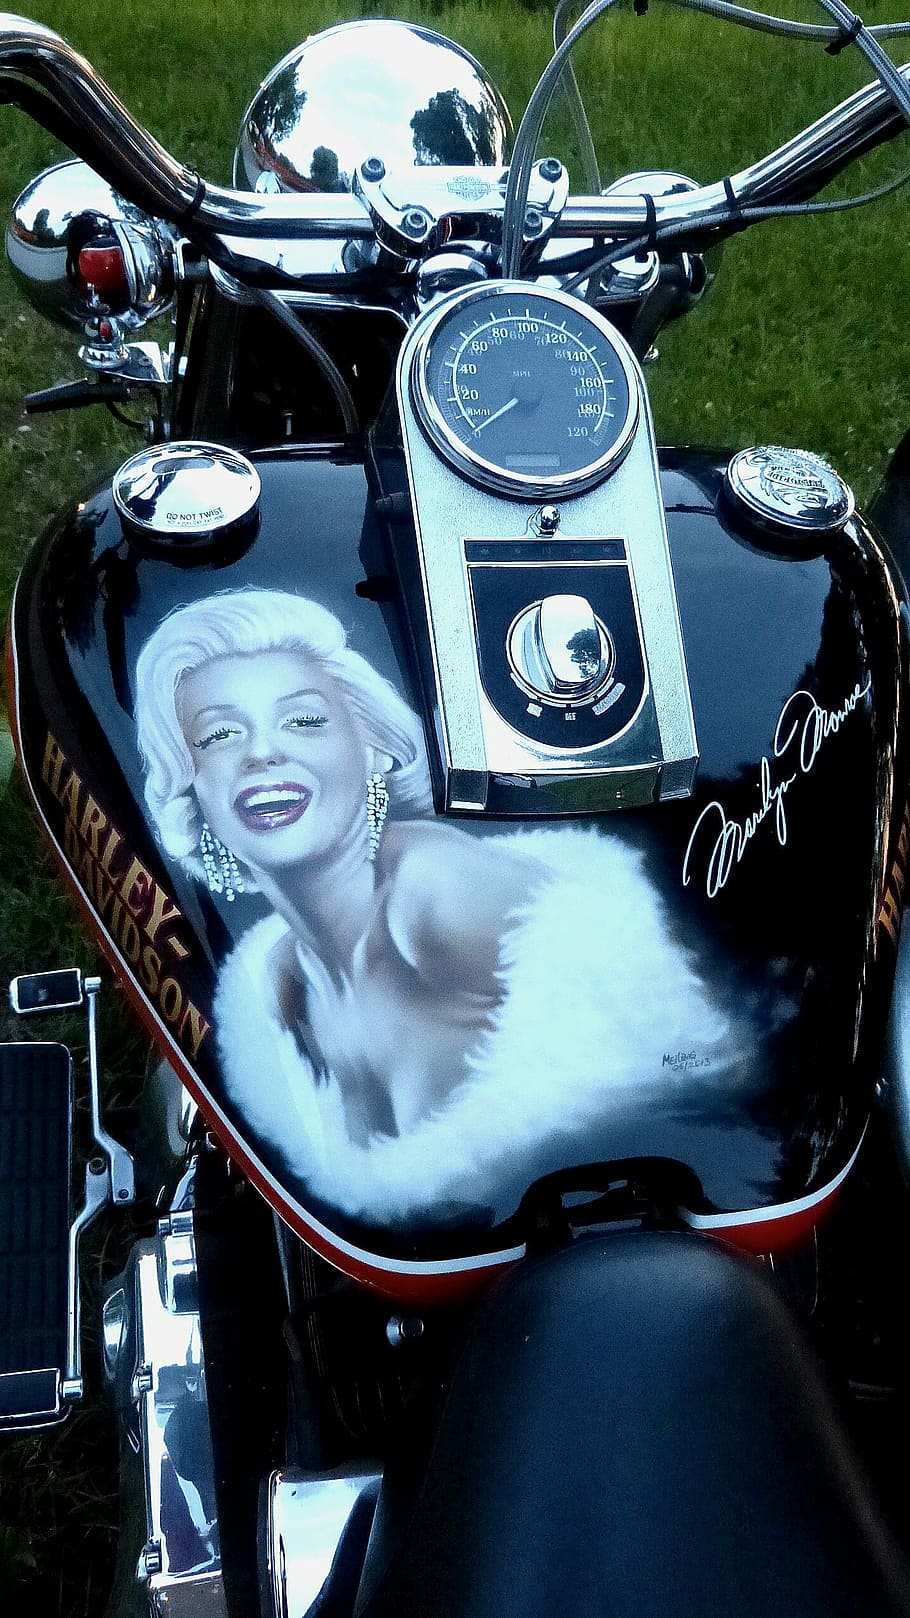 Harley Davidson, Marilyn Monroe, motorcycle, retro styled, old-fashioned, HD wallpaper